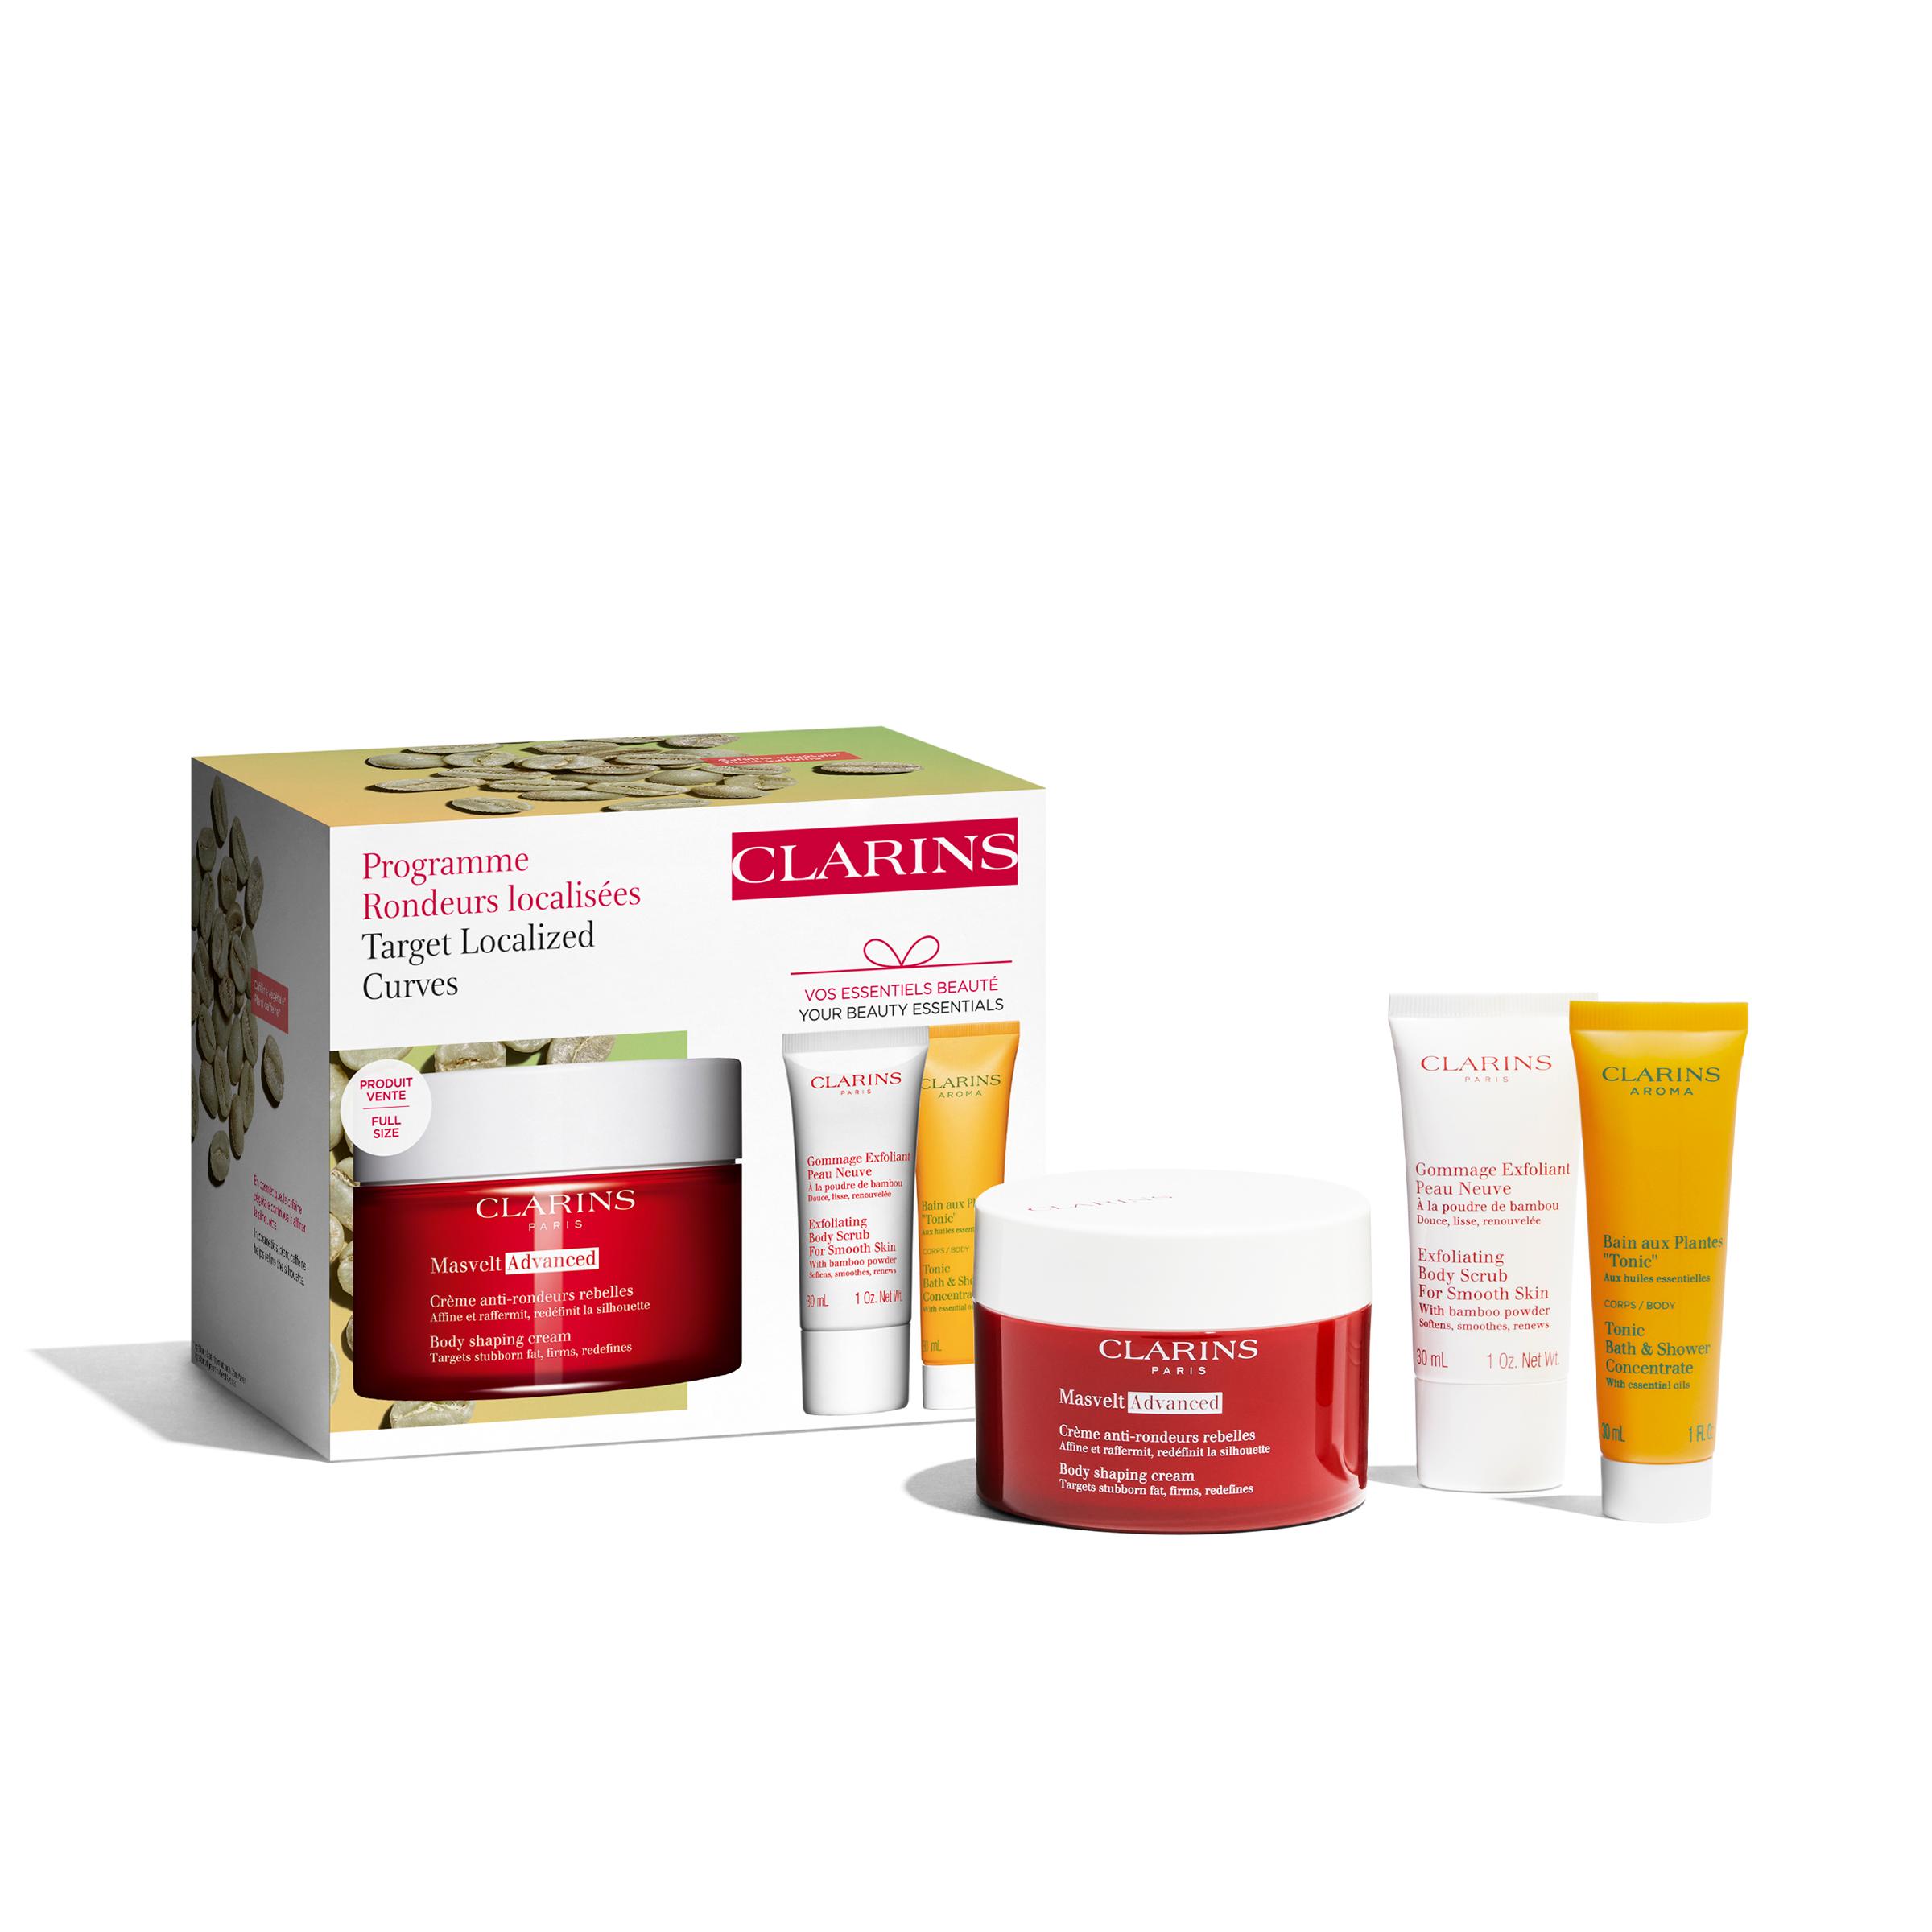 Clarins Body - Target Localized Curves